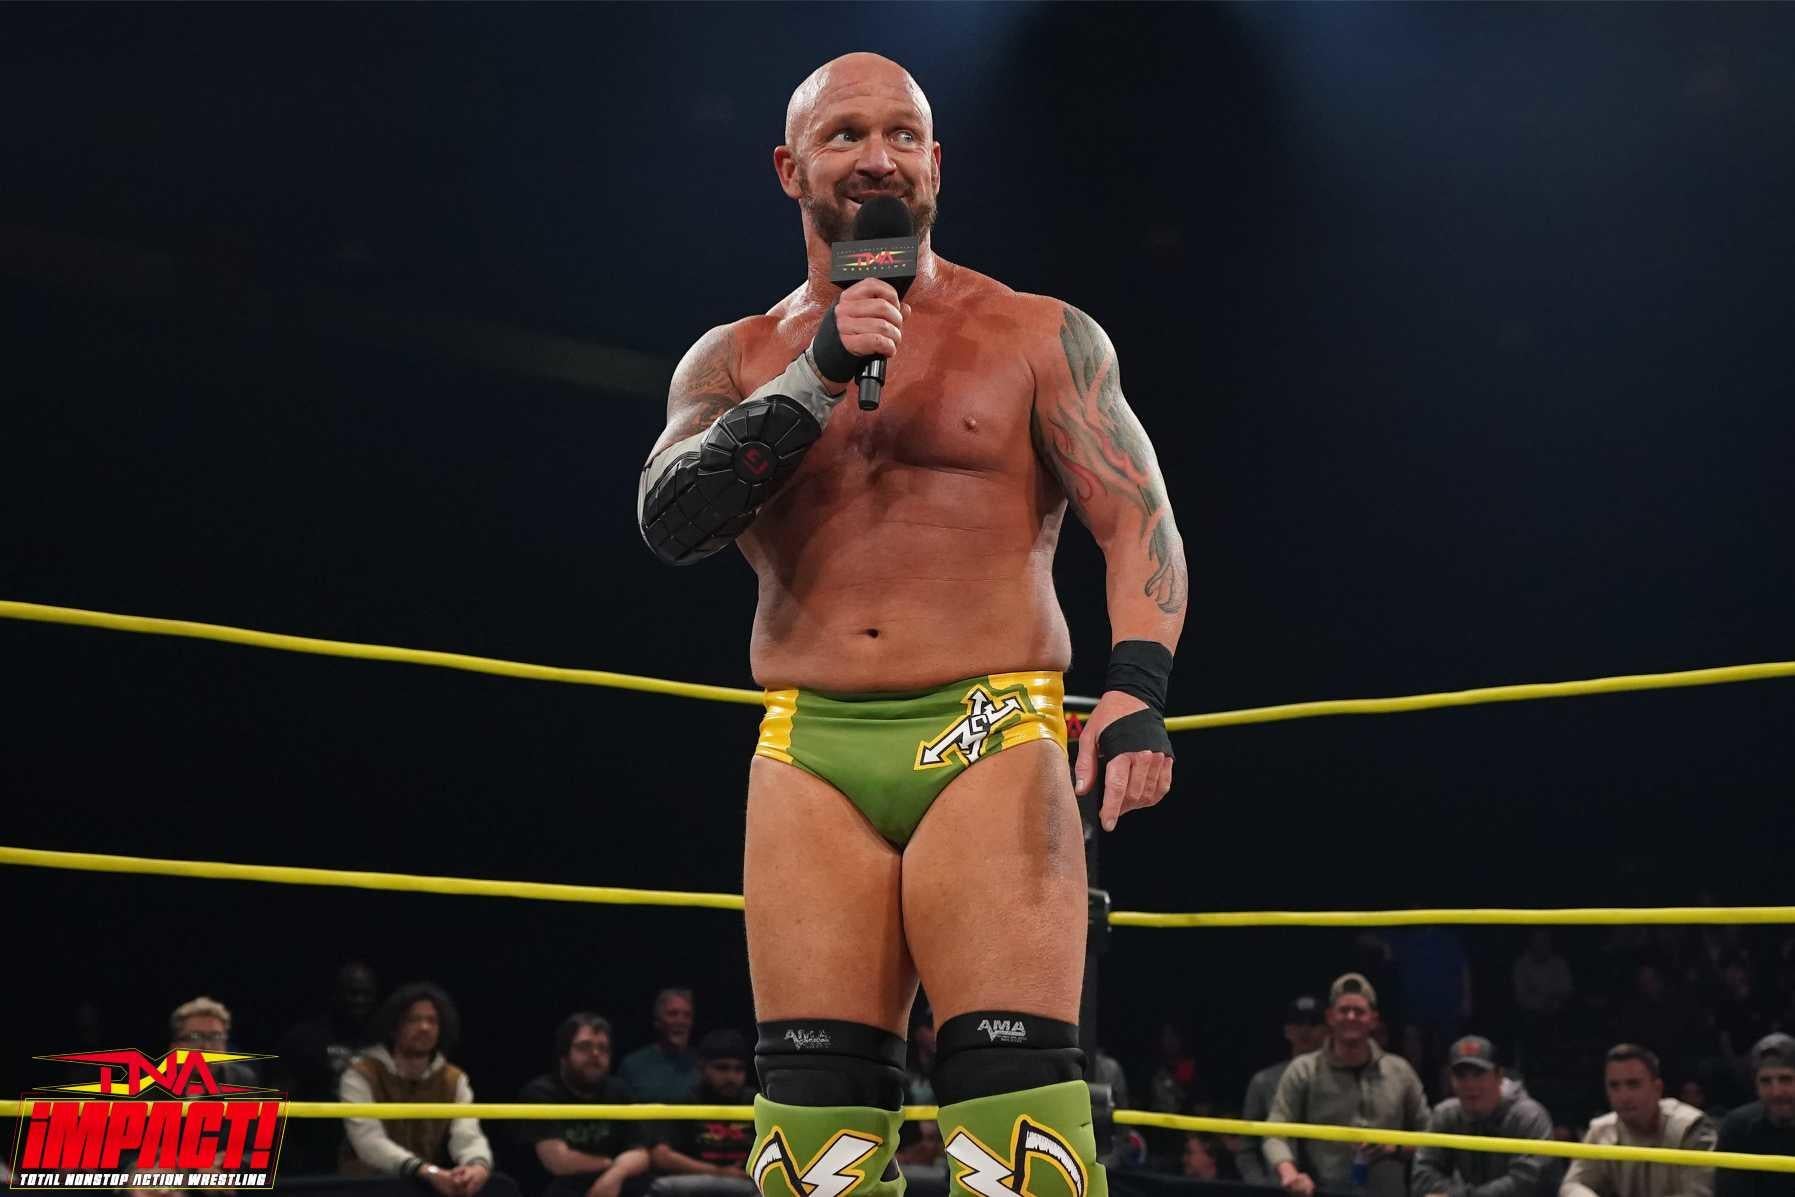 TNA's Eric Young Has No Interest in Signing with AEW: "I'll Finish My Career in TNA"